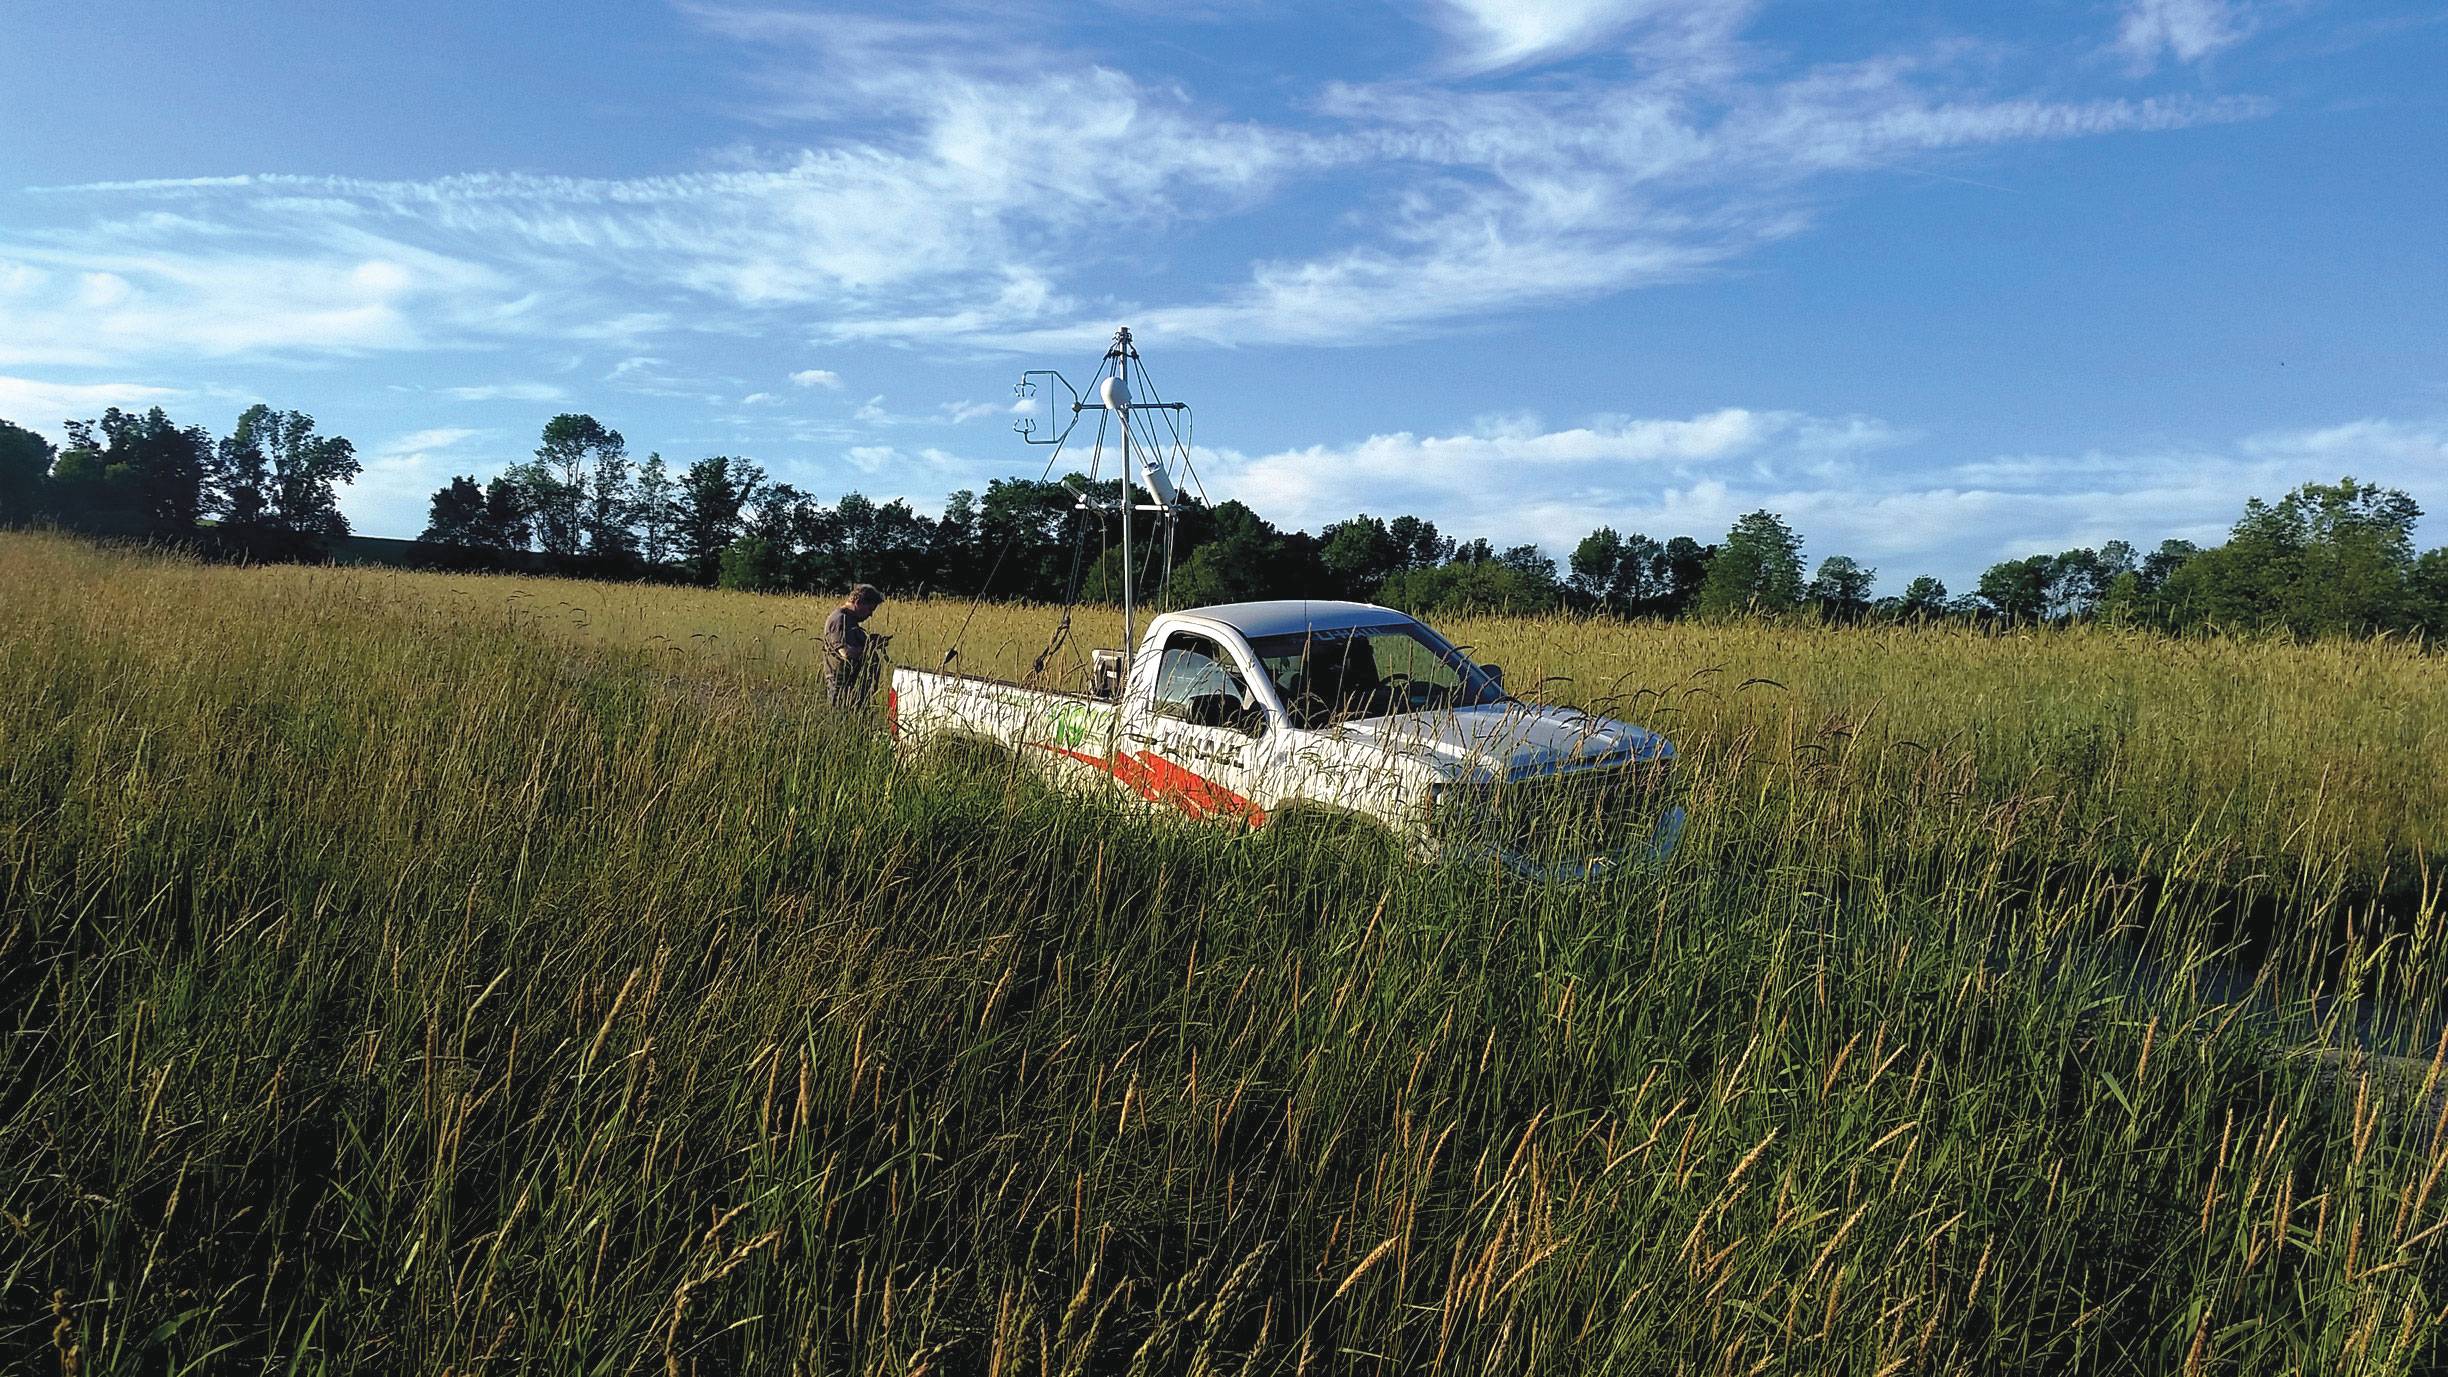 A truck with air pollution measurement equipment in the cab, parked in a tall grassy field.